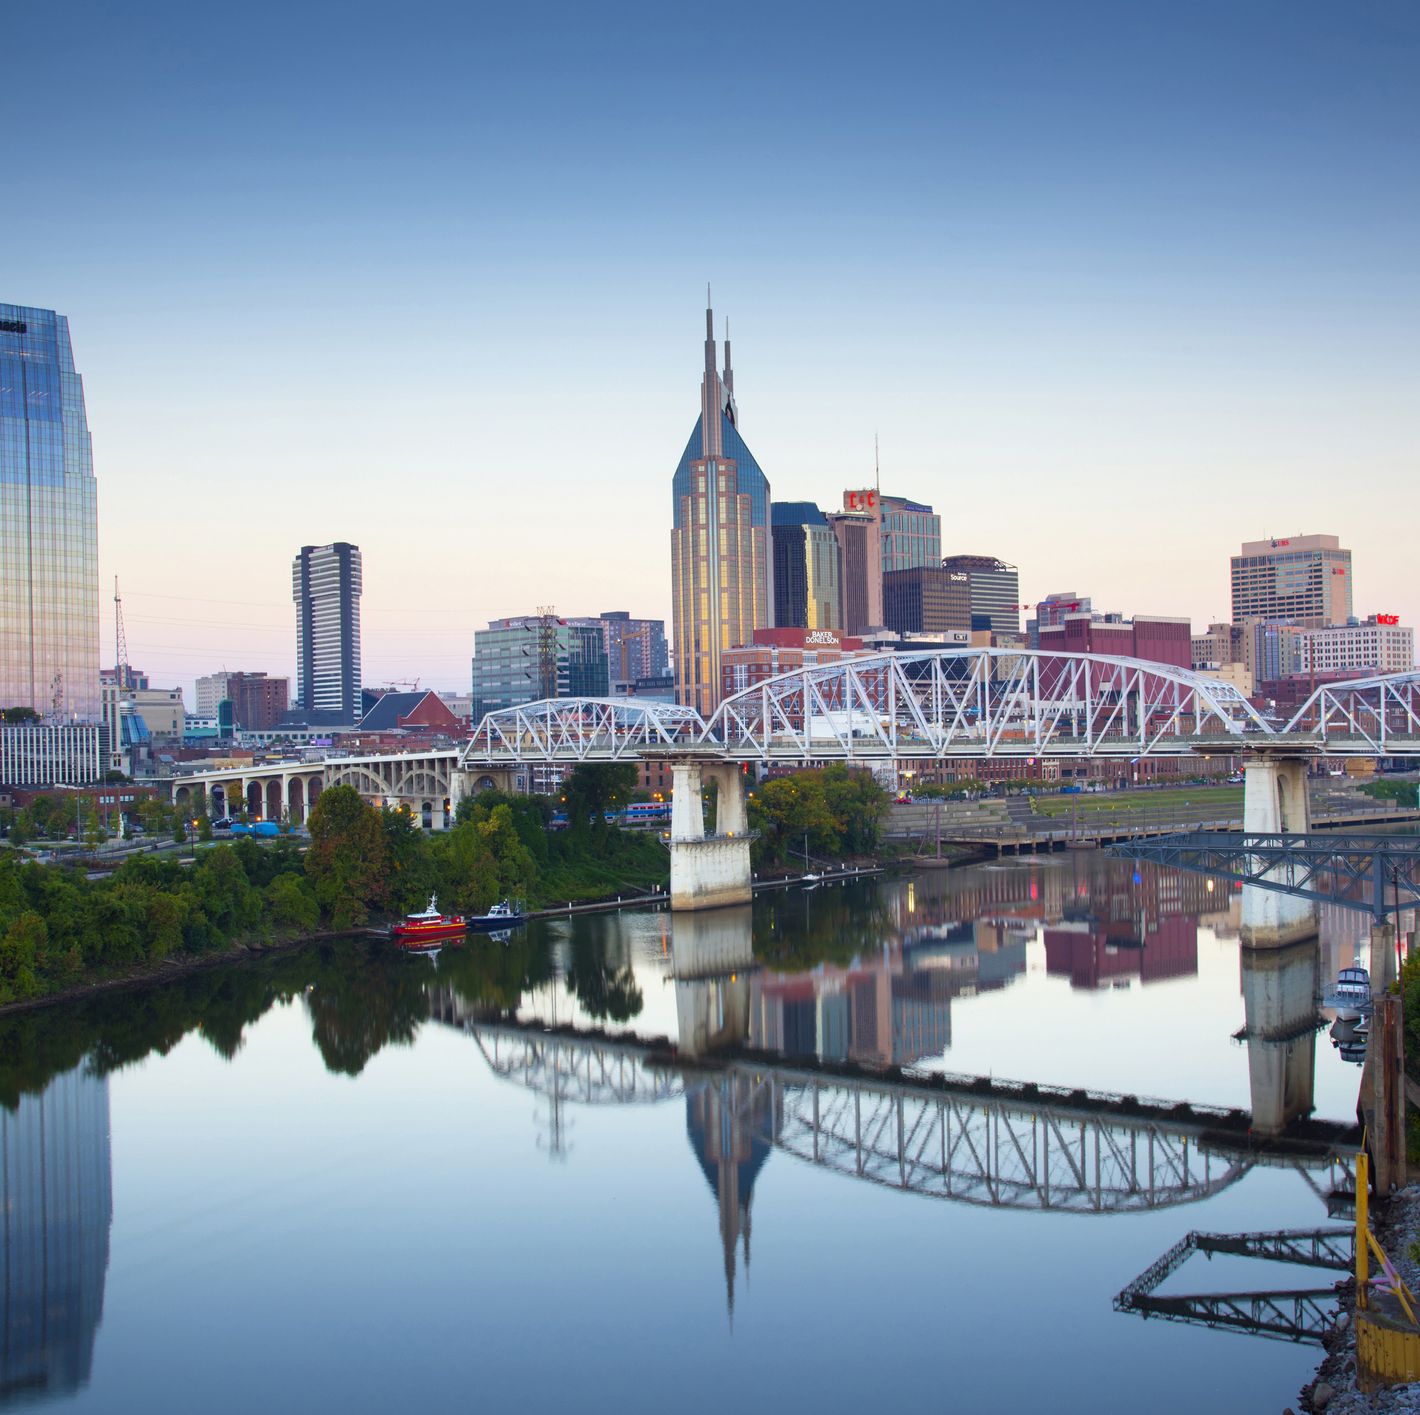 Get inspired to visit Music City.